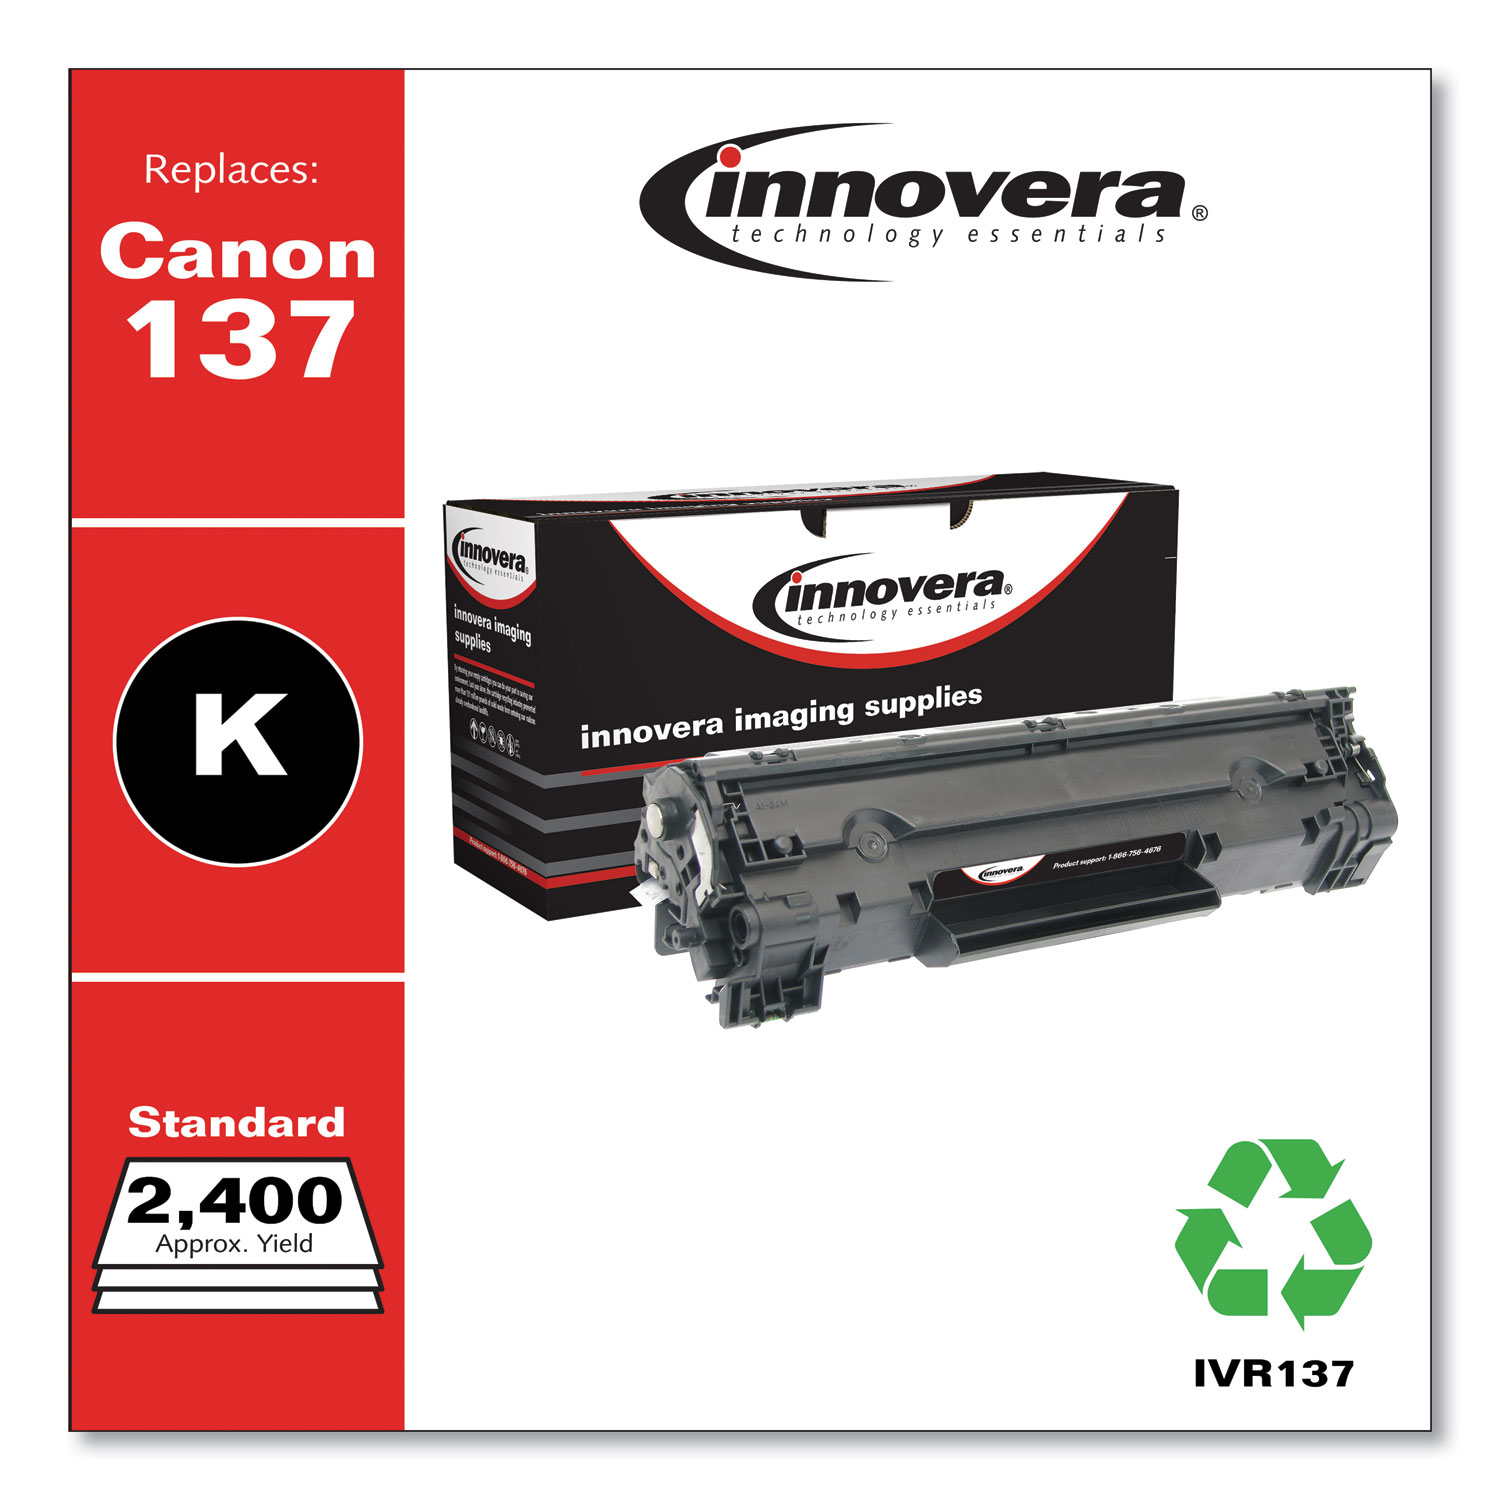  Innovera IVR137 Remanufactured 9435B001AA (137) Toner, 2400 Page-Yield, Black (IVR137) 